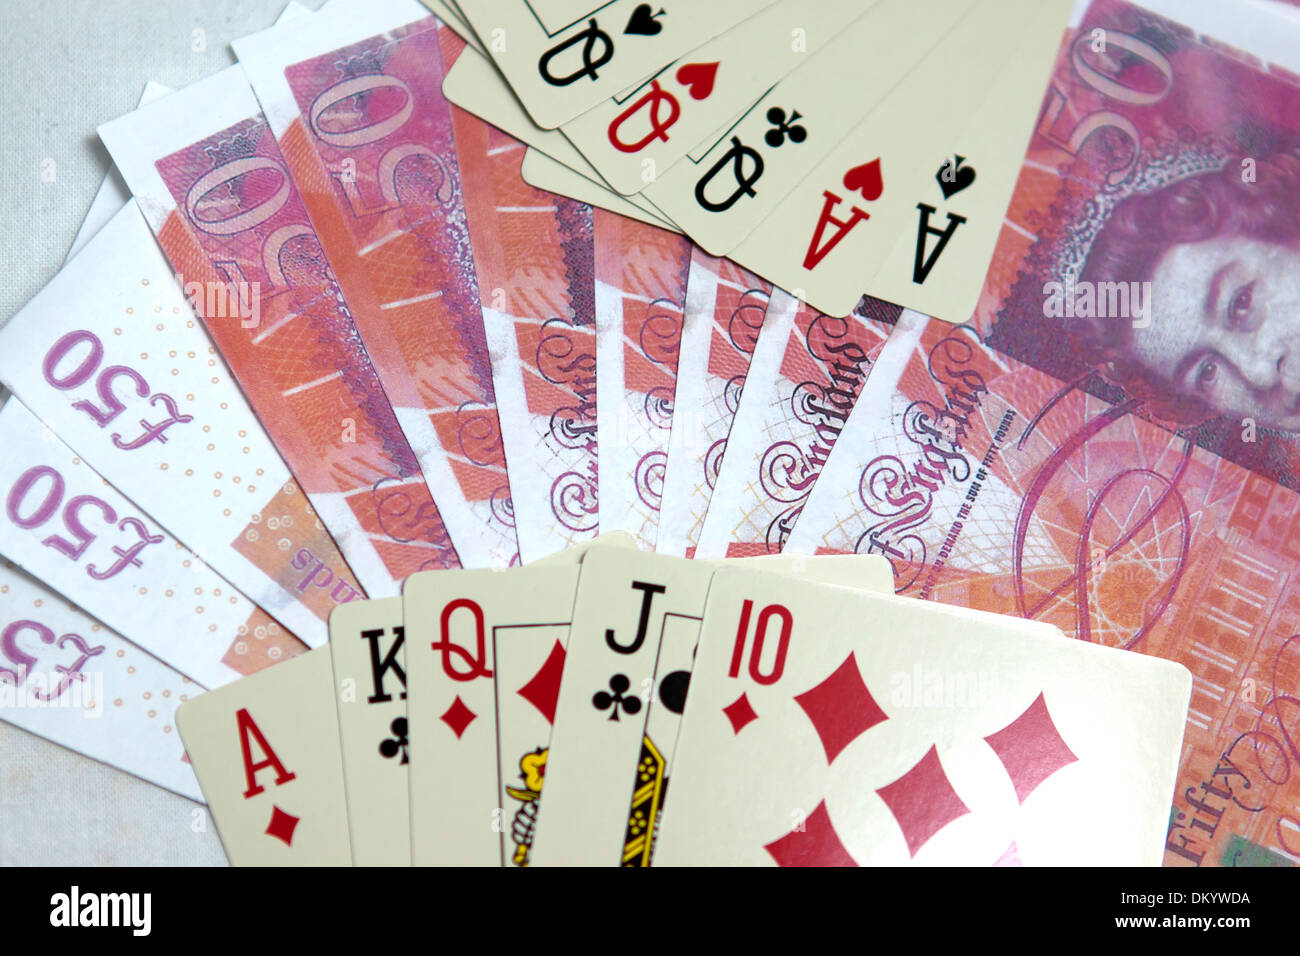 Playing cards and money in casino. Stock Photo